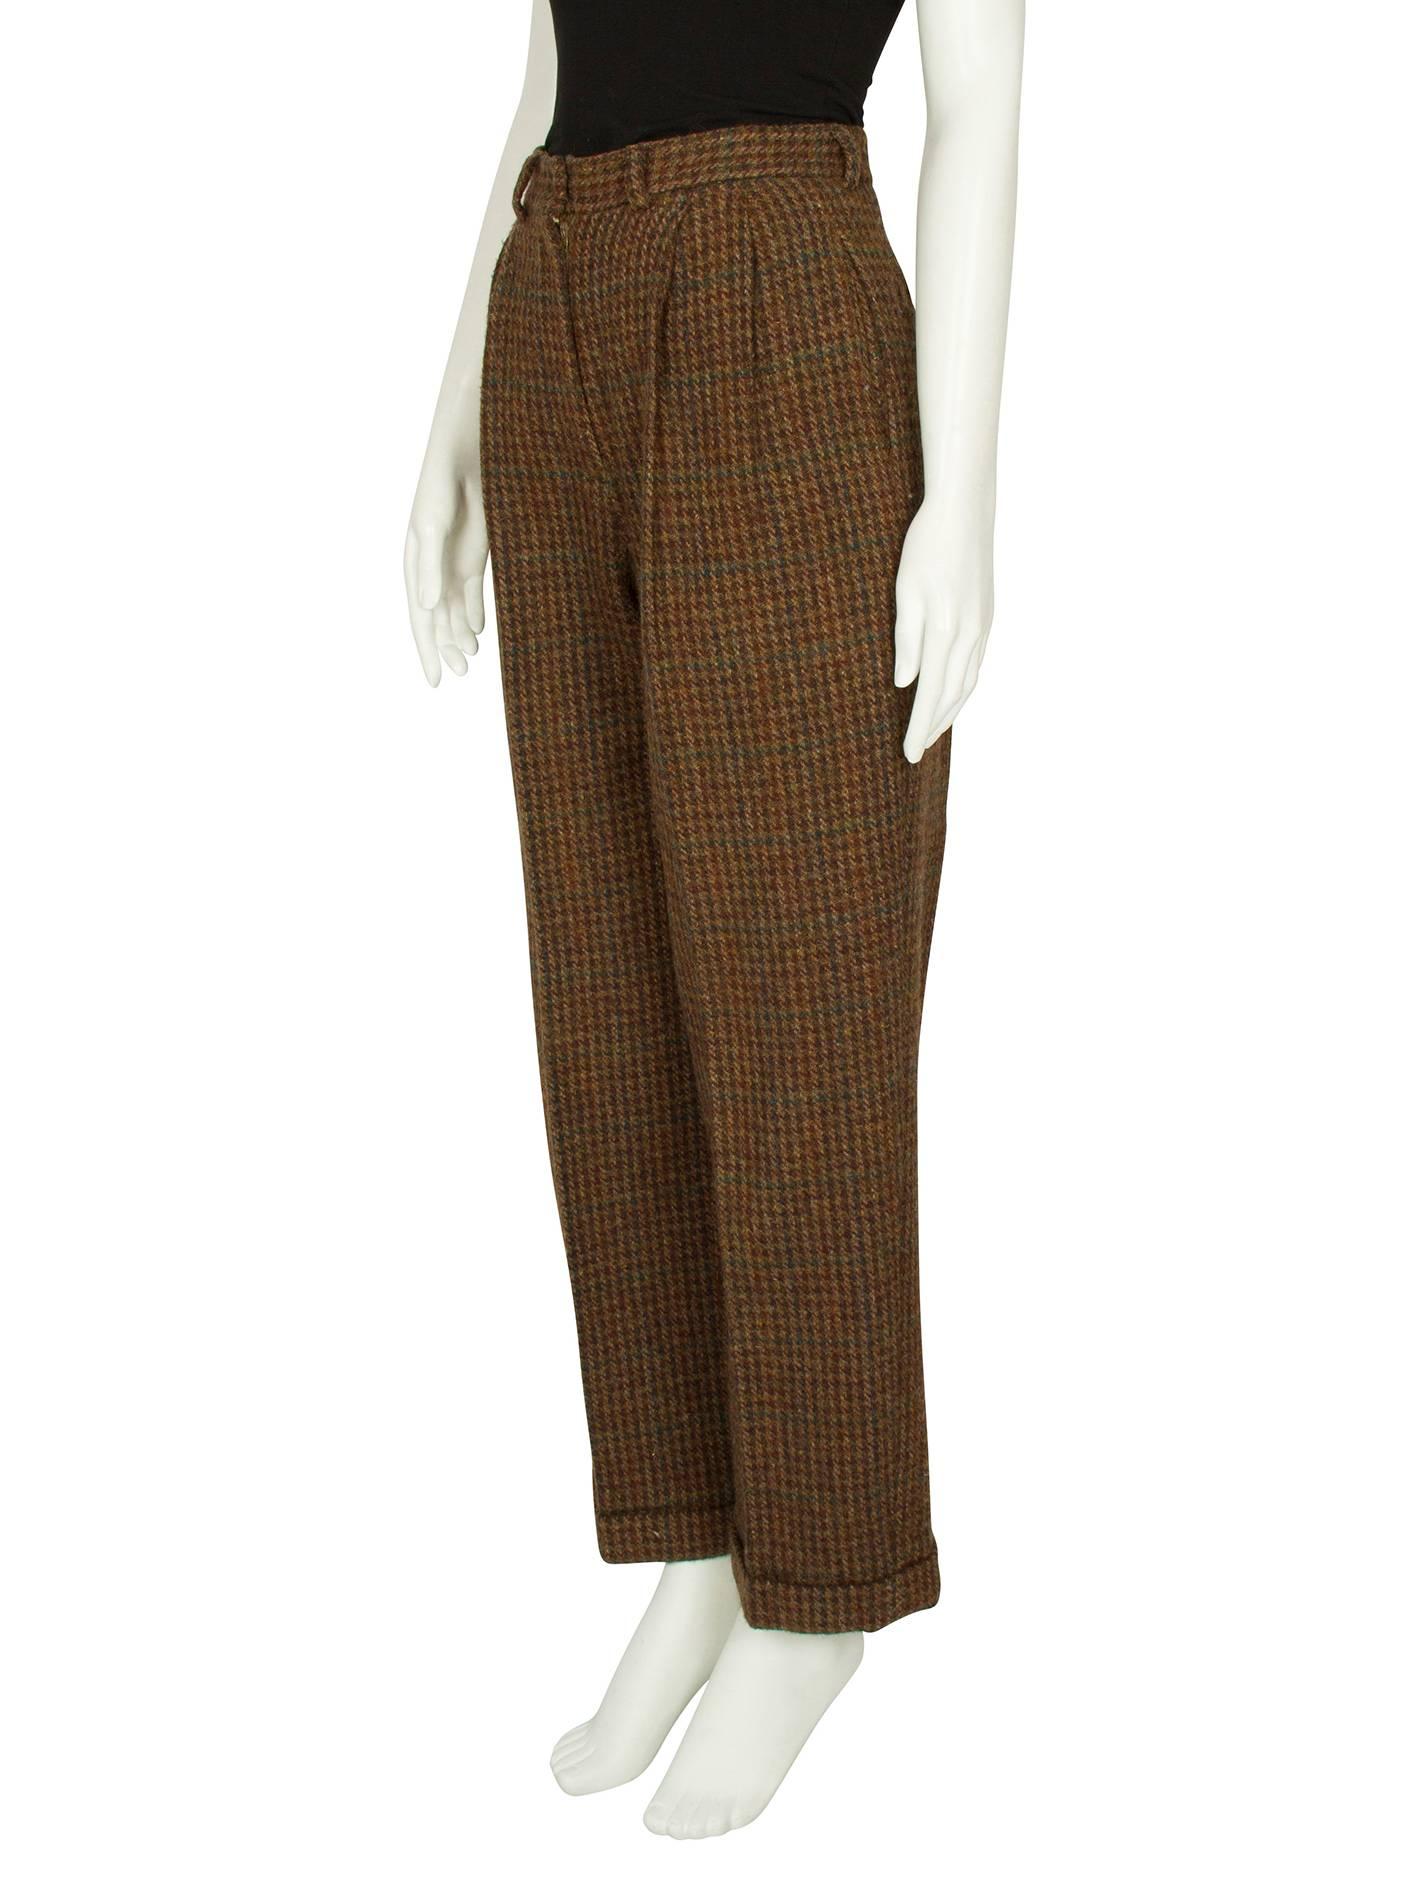 1980s Ralph Lauren Green and Burgundy Houndstooth Wool Trousers For Sale 4